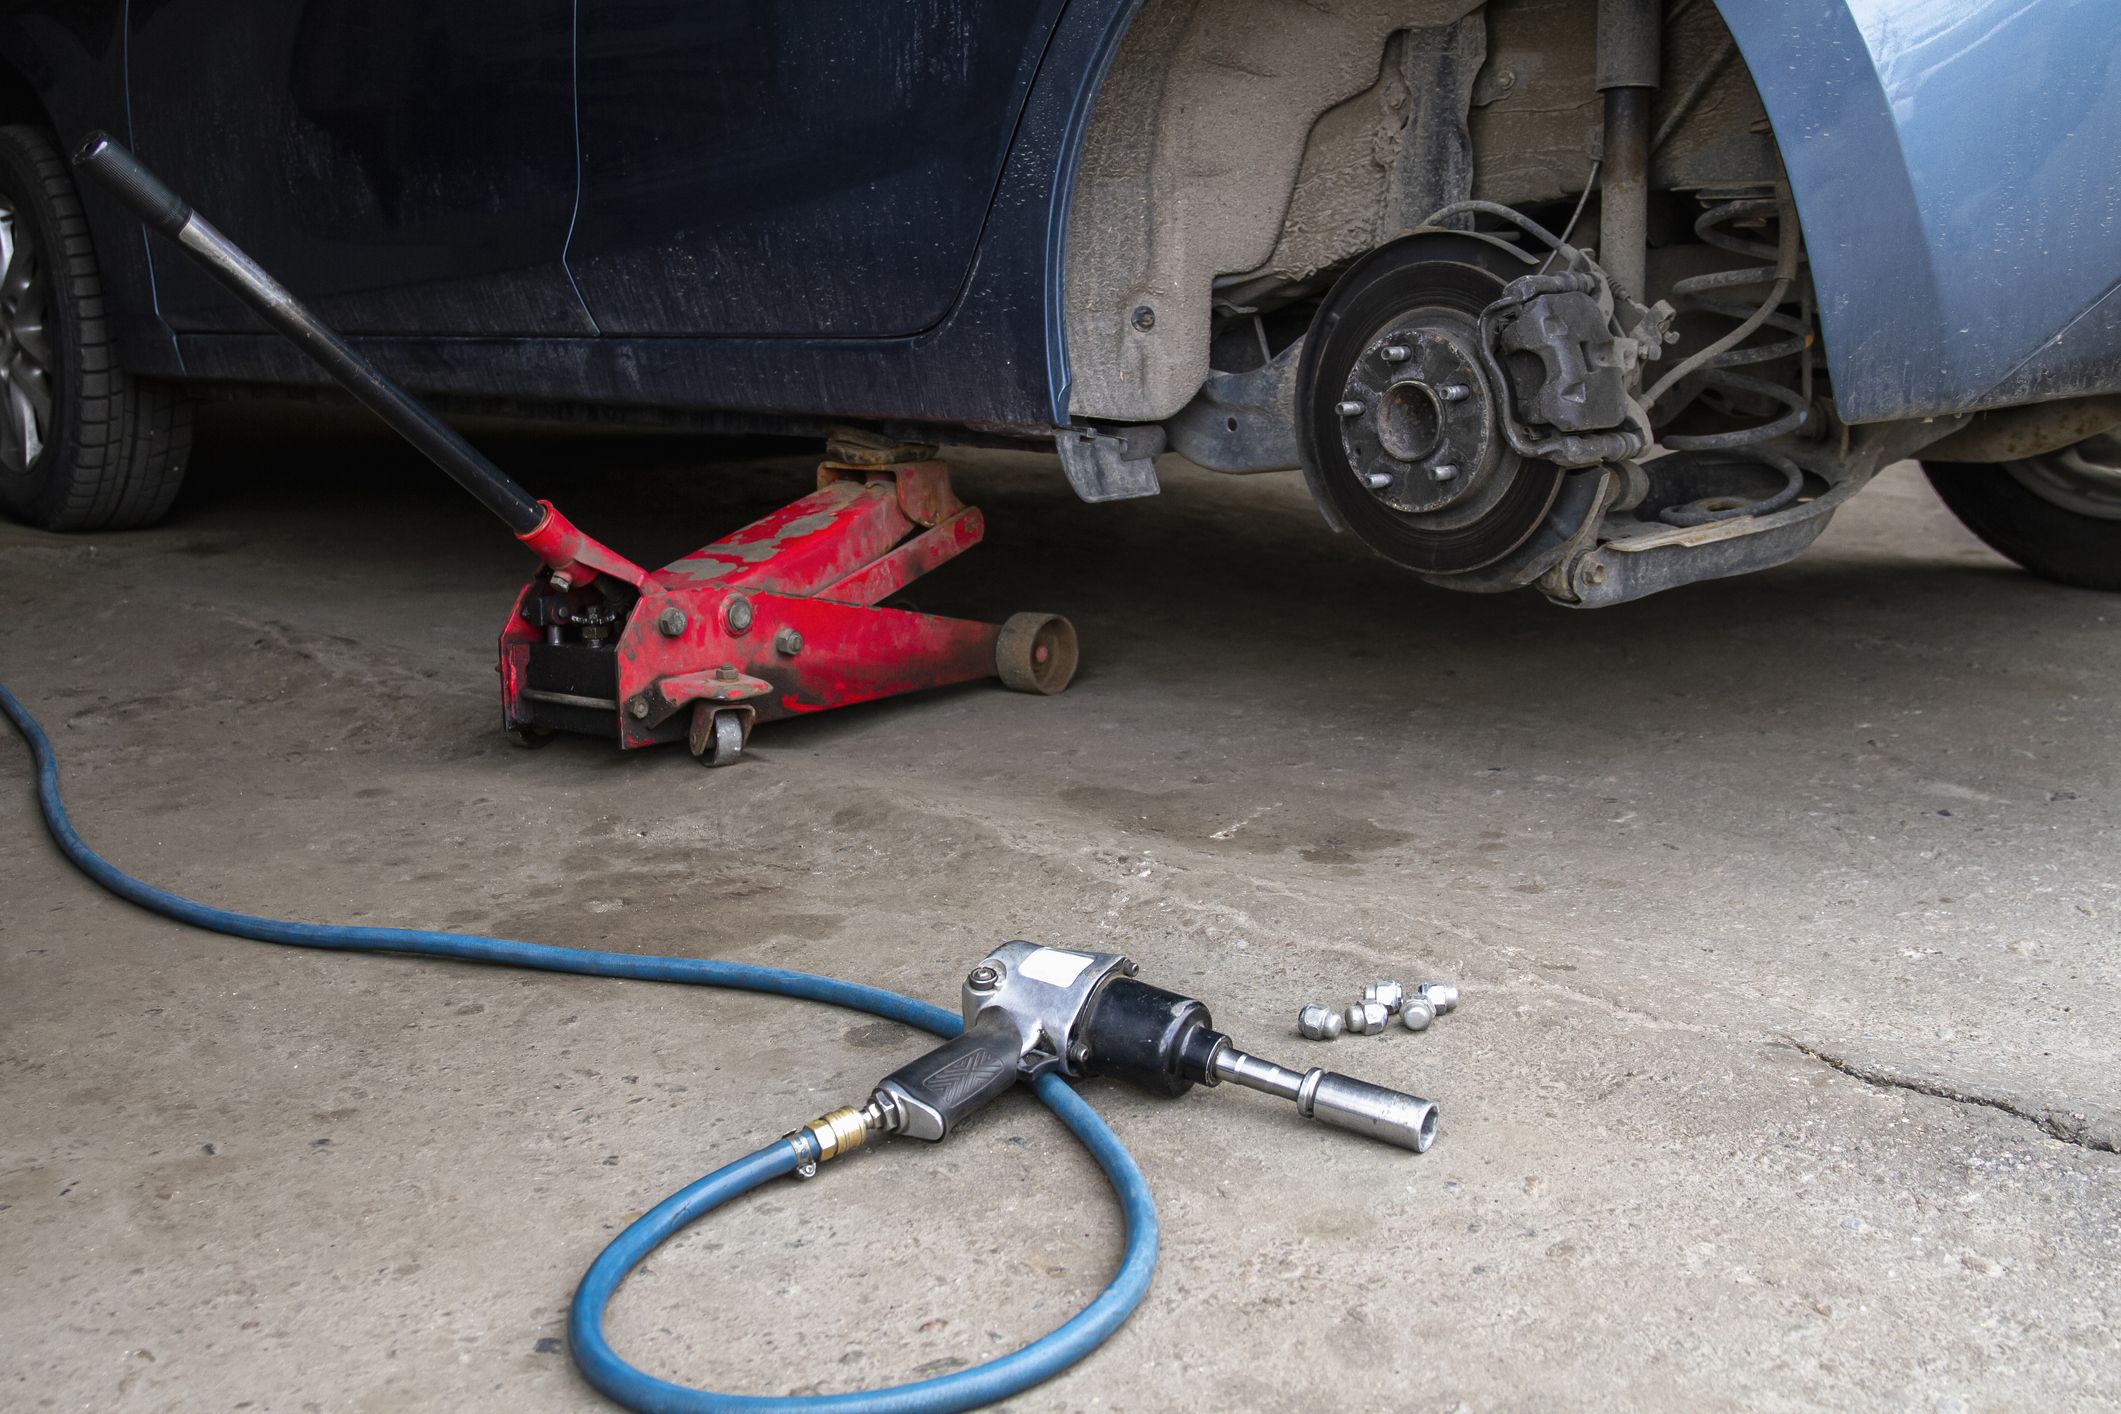 Corner Wrench: Tools you'll need for DIY tire swaps